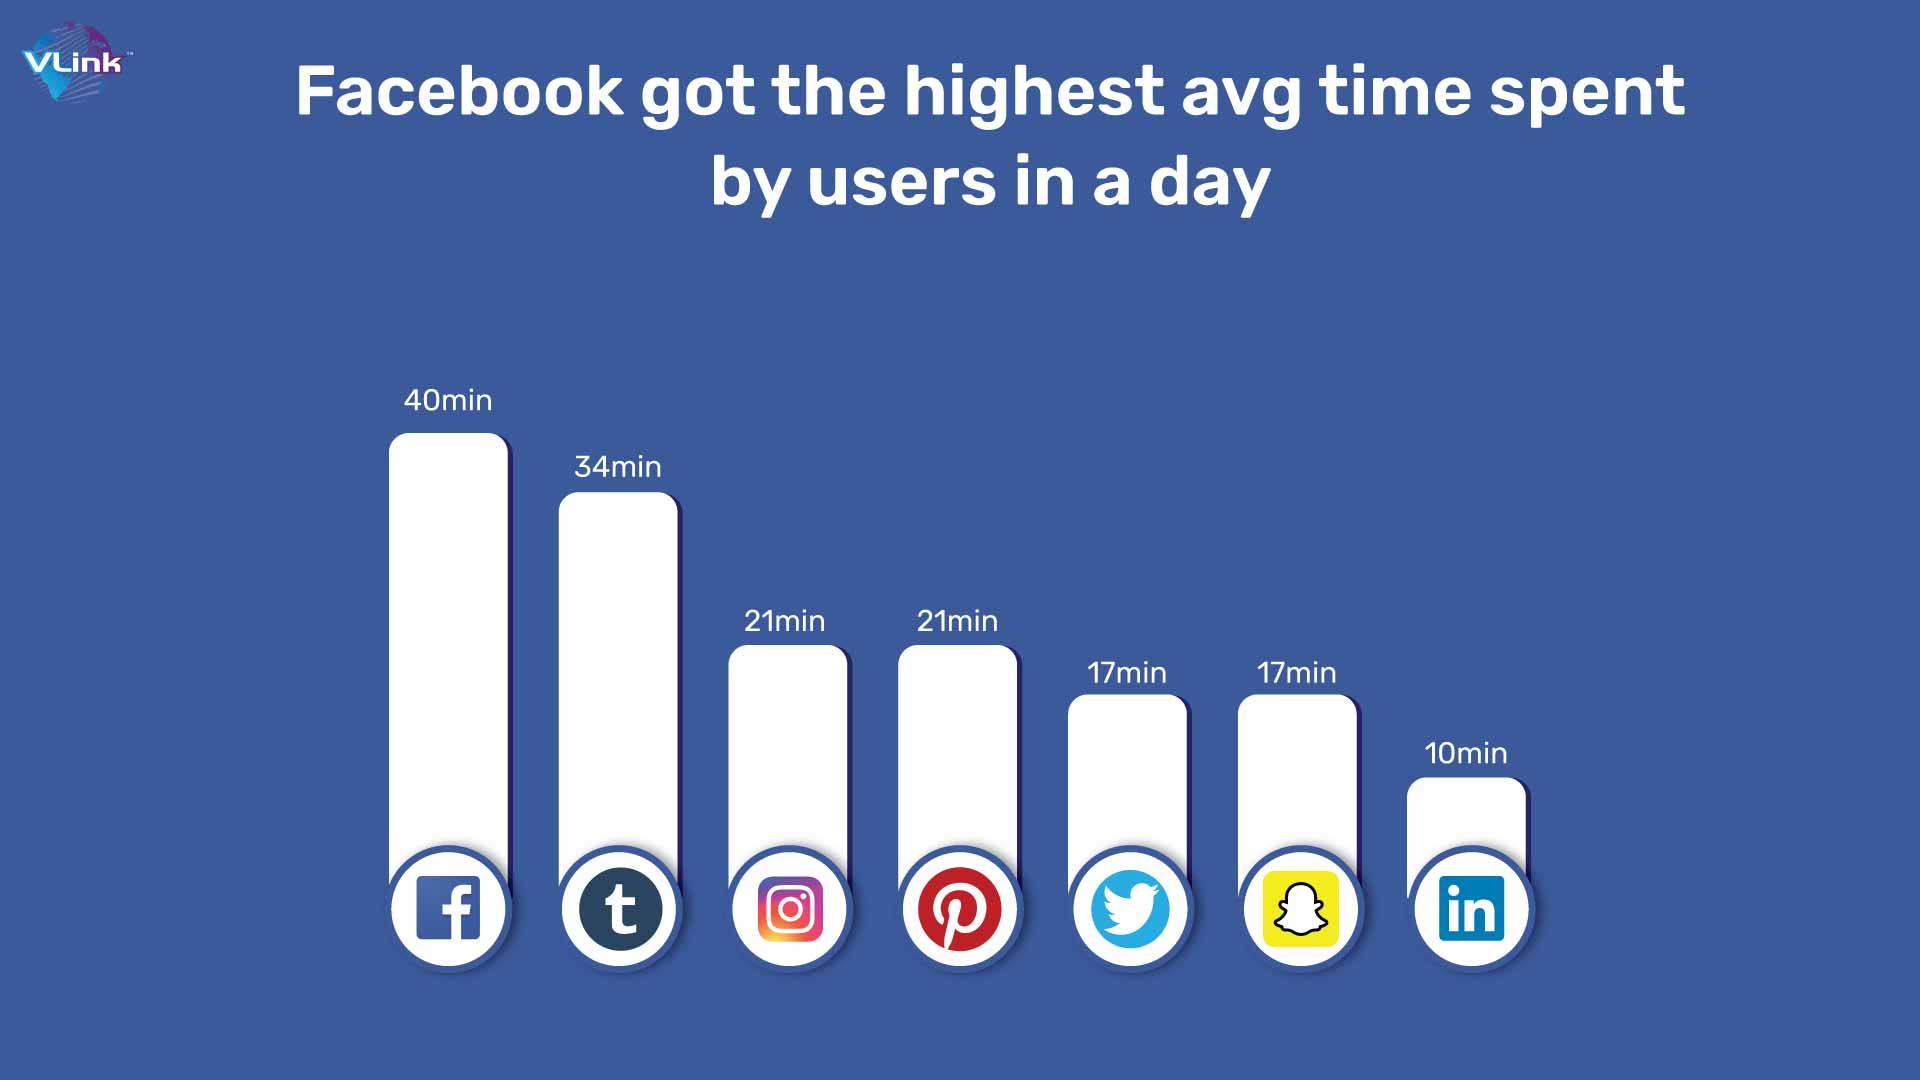 Facebook got the highest avg time spent by users in a day